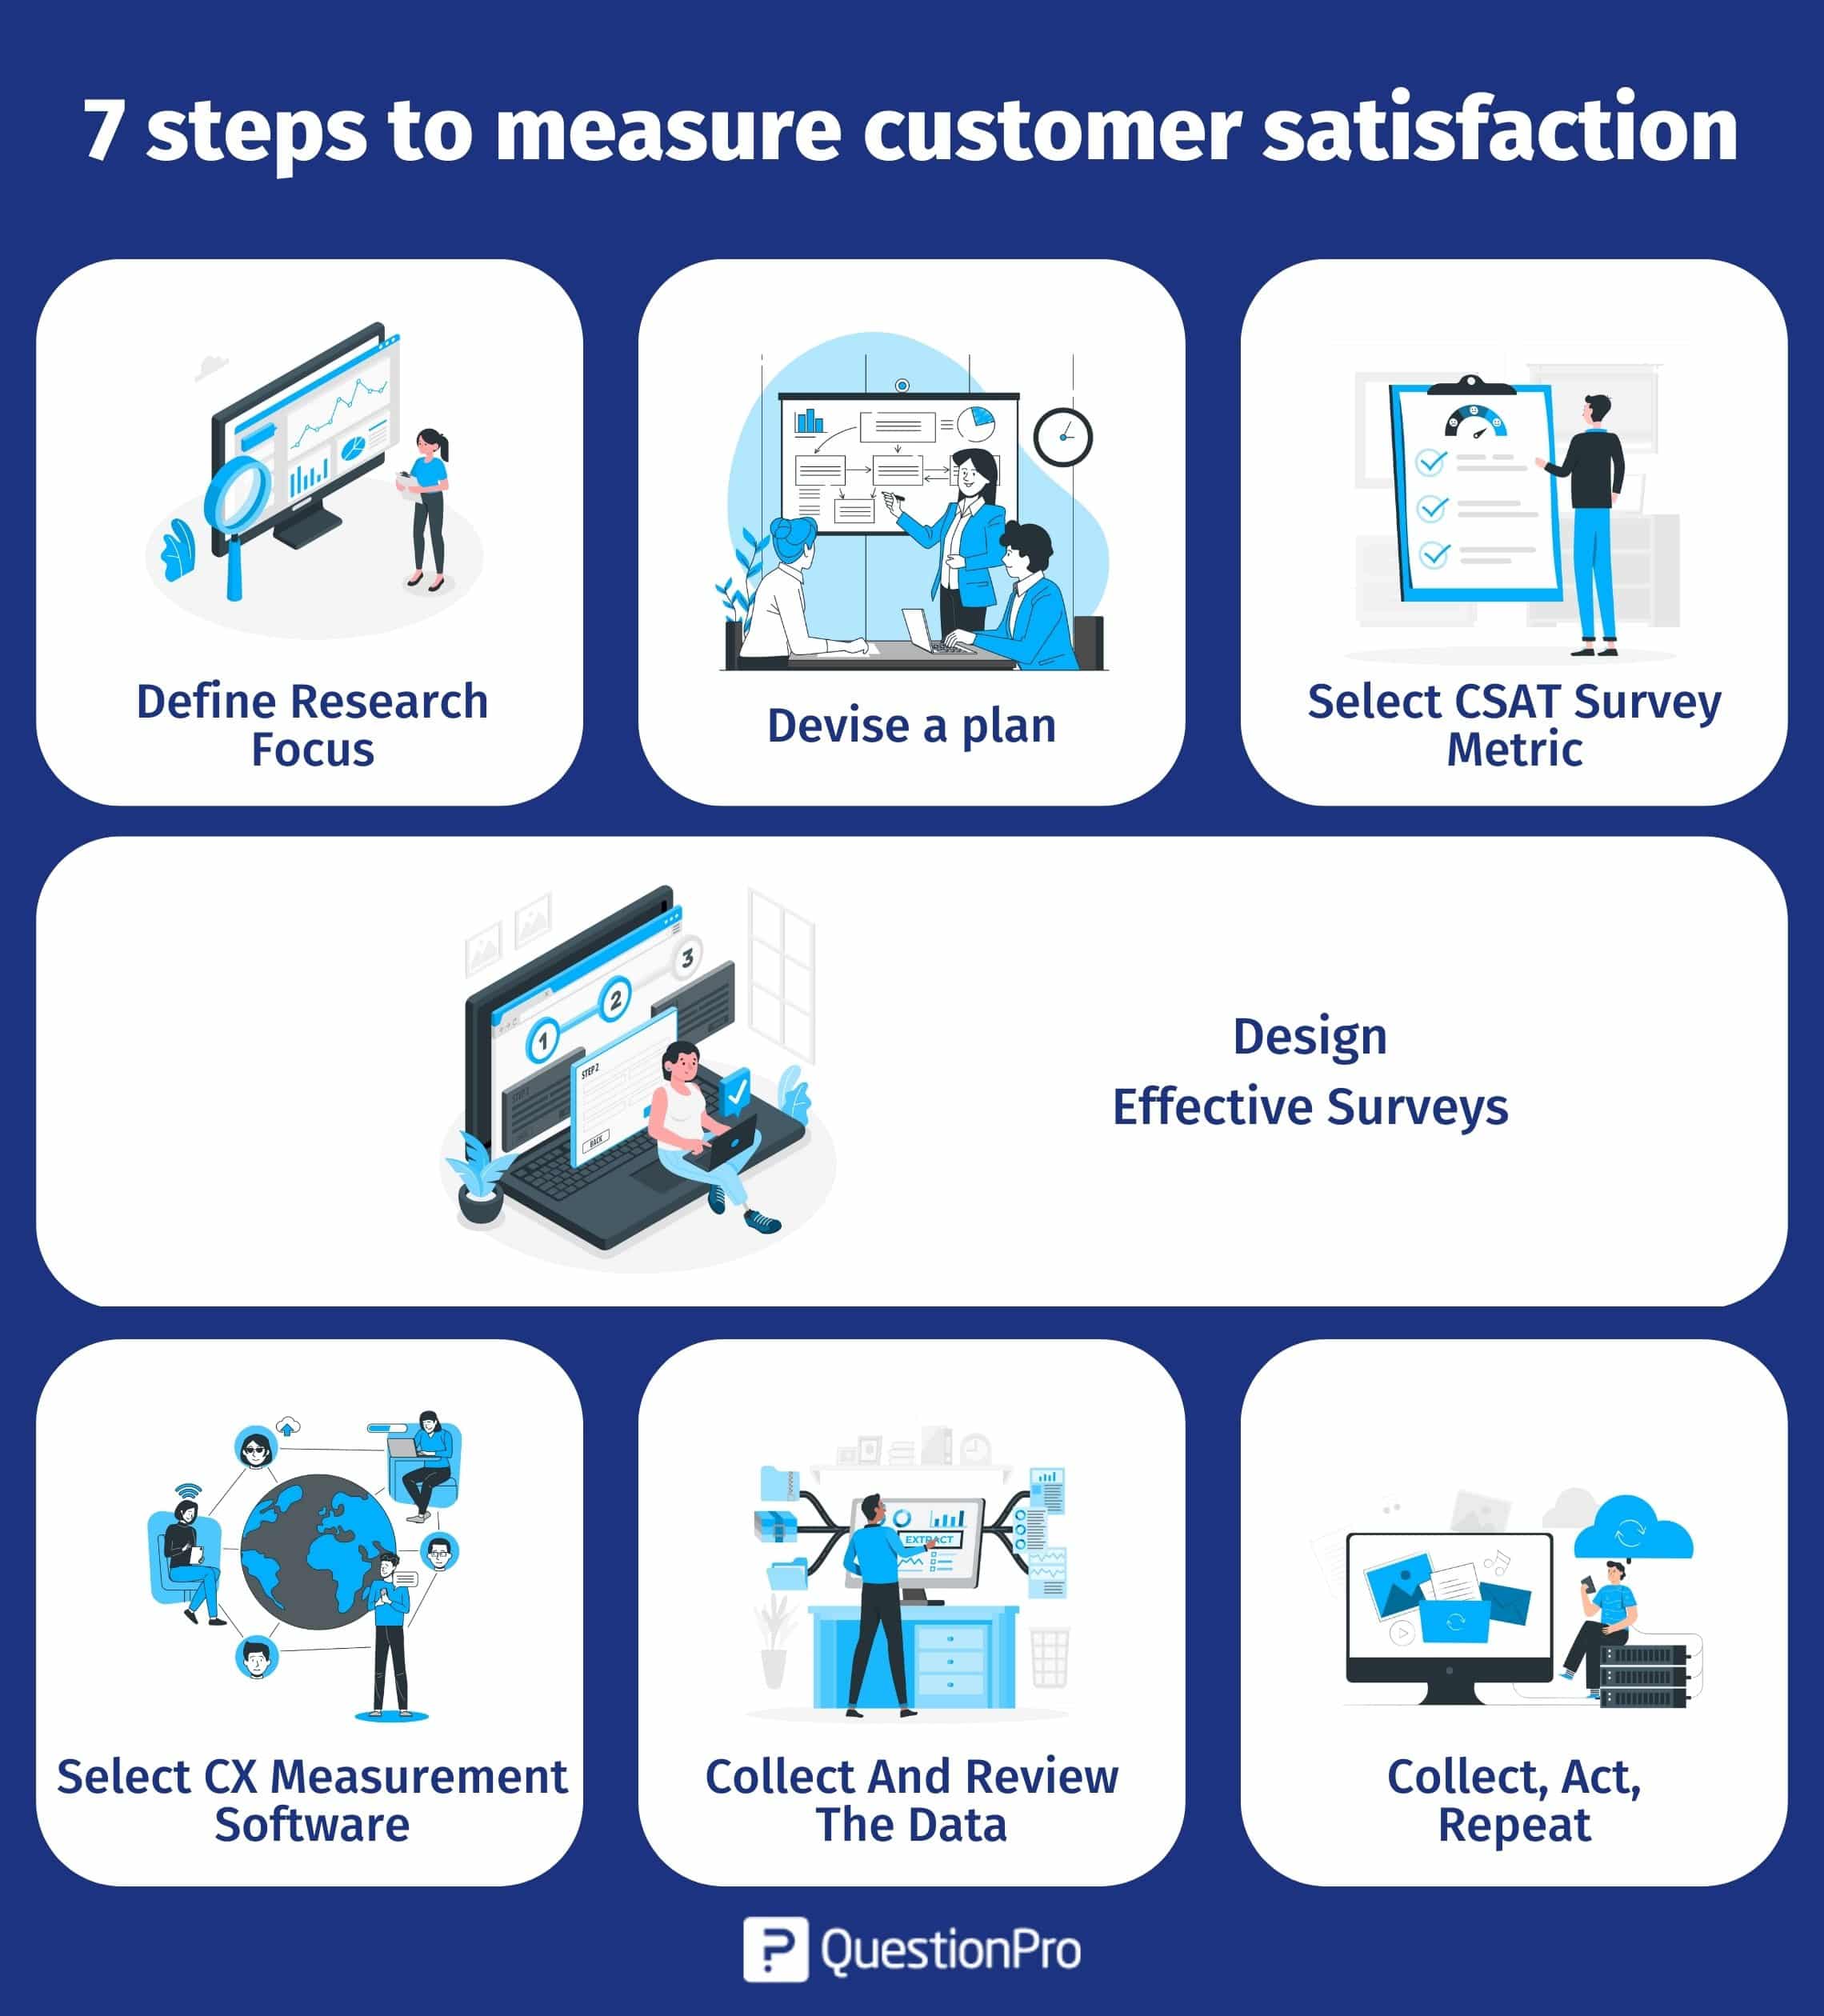 research on customer satisfaction study